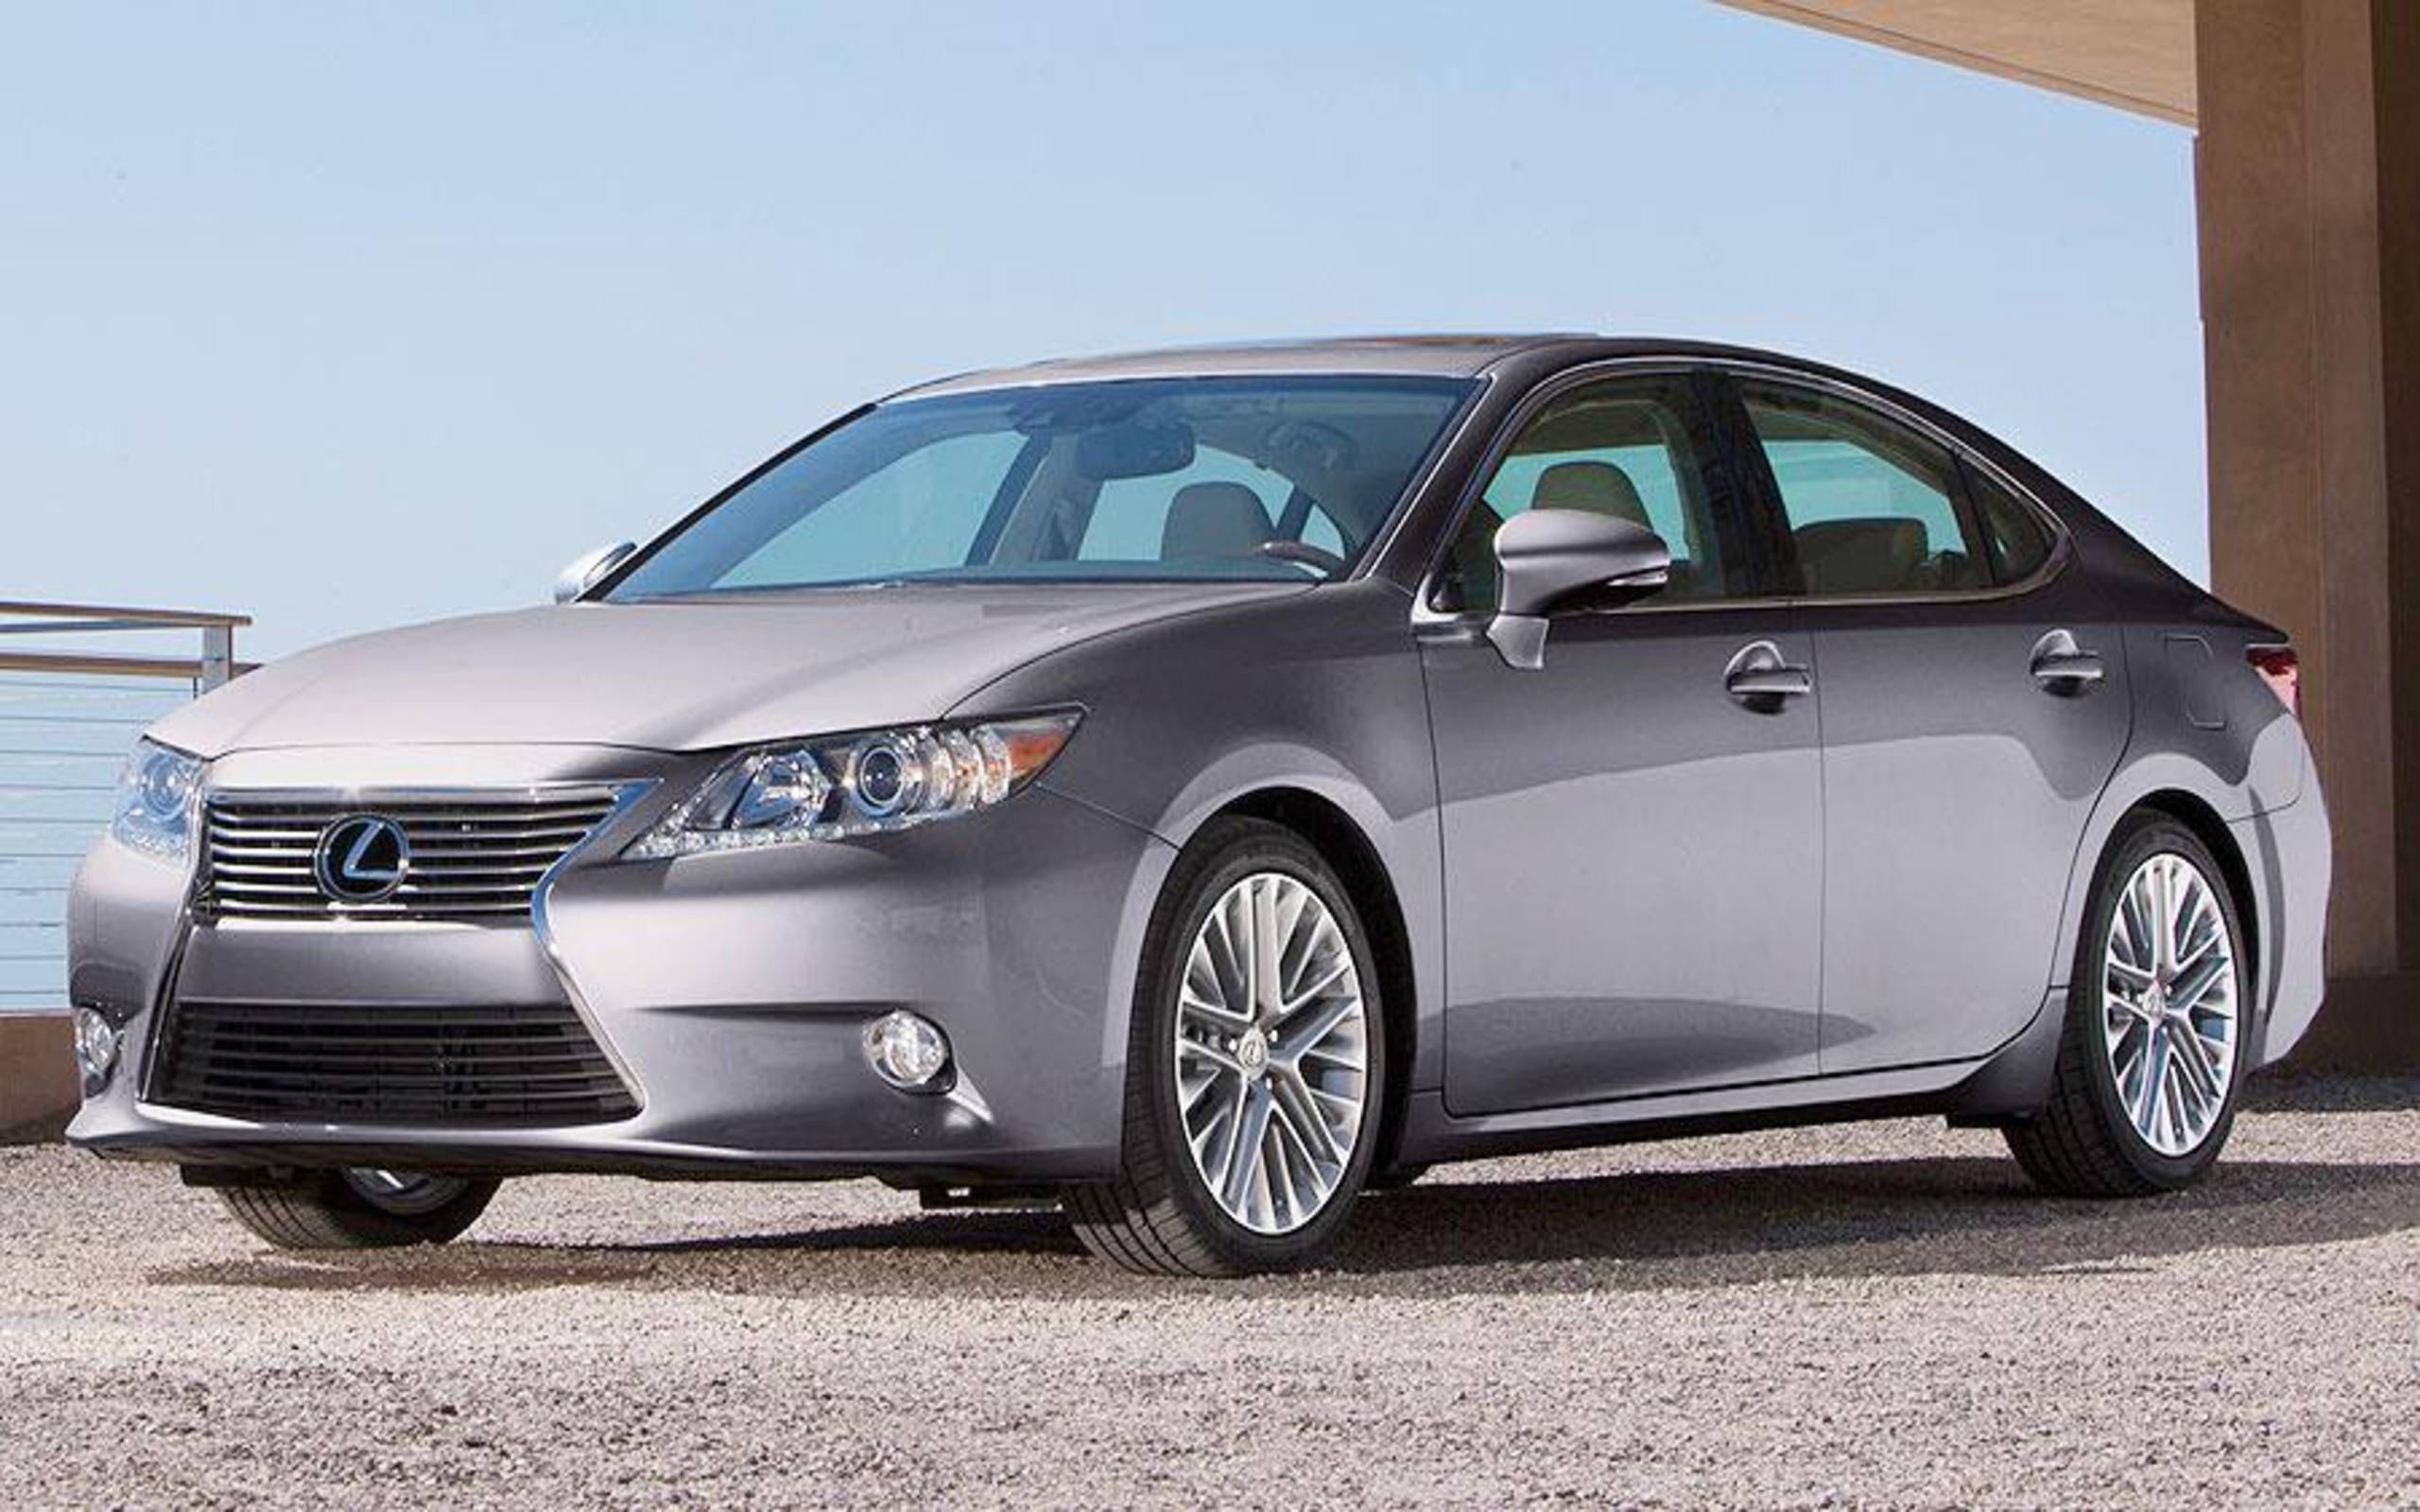 2013 Lexus ES 350 and ES 300h hybrid politely launched at New York